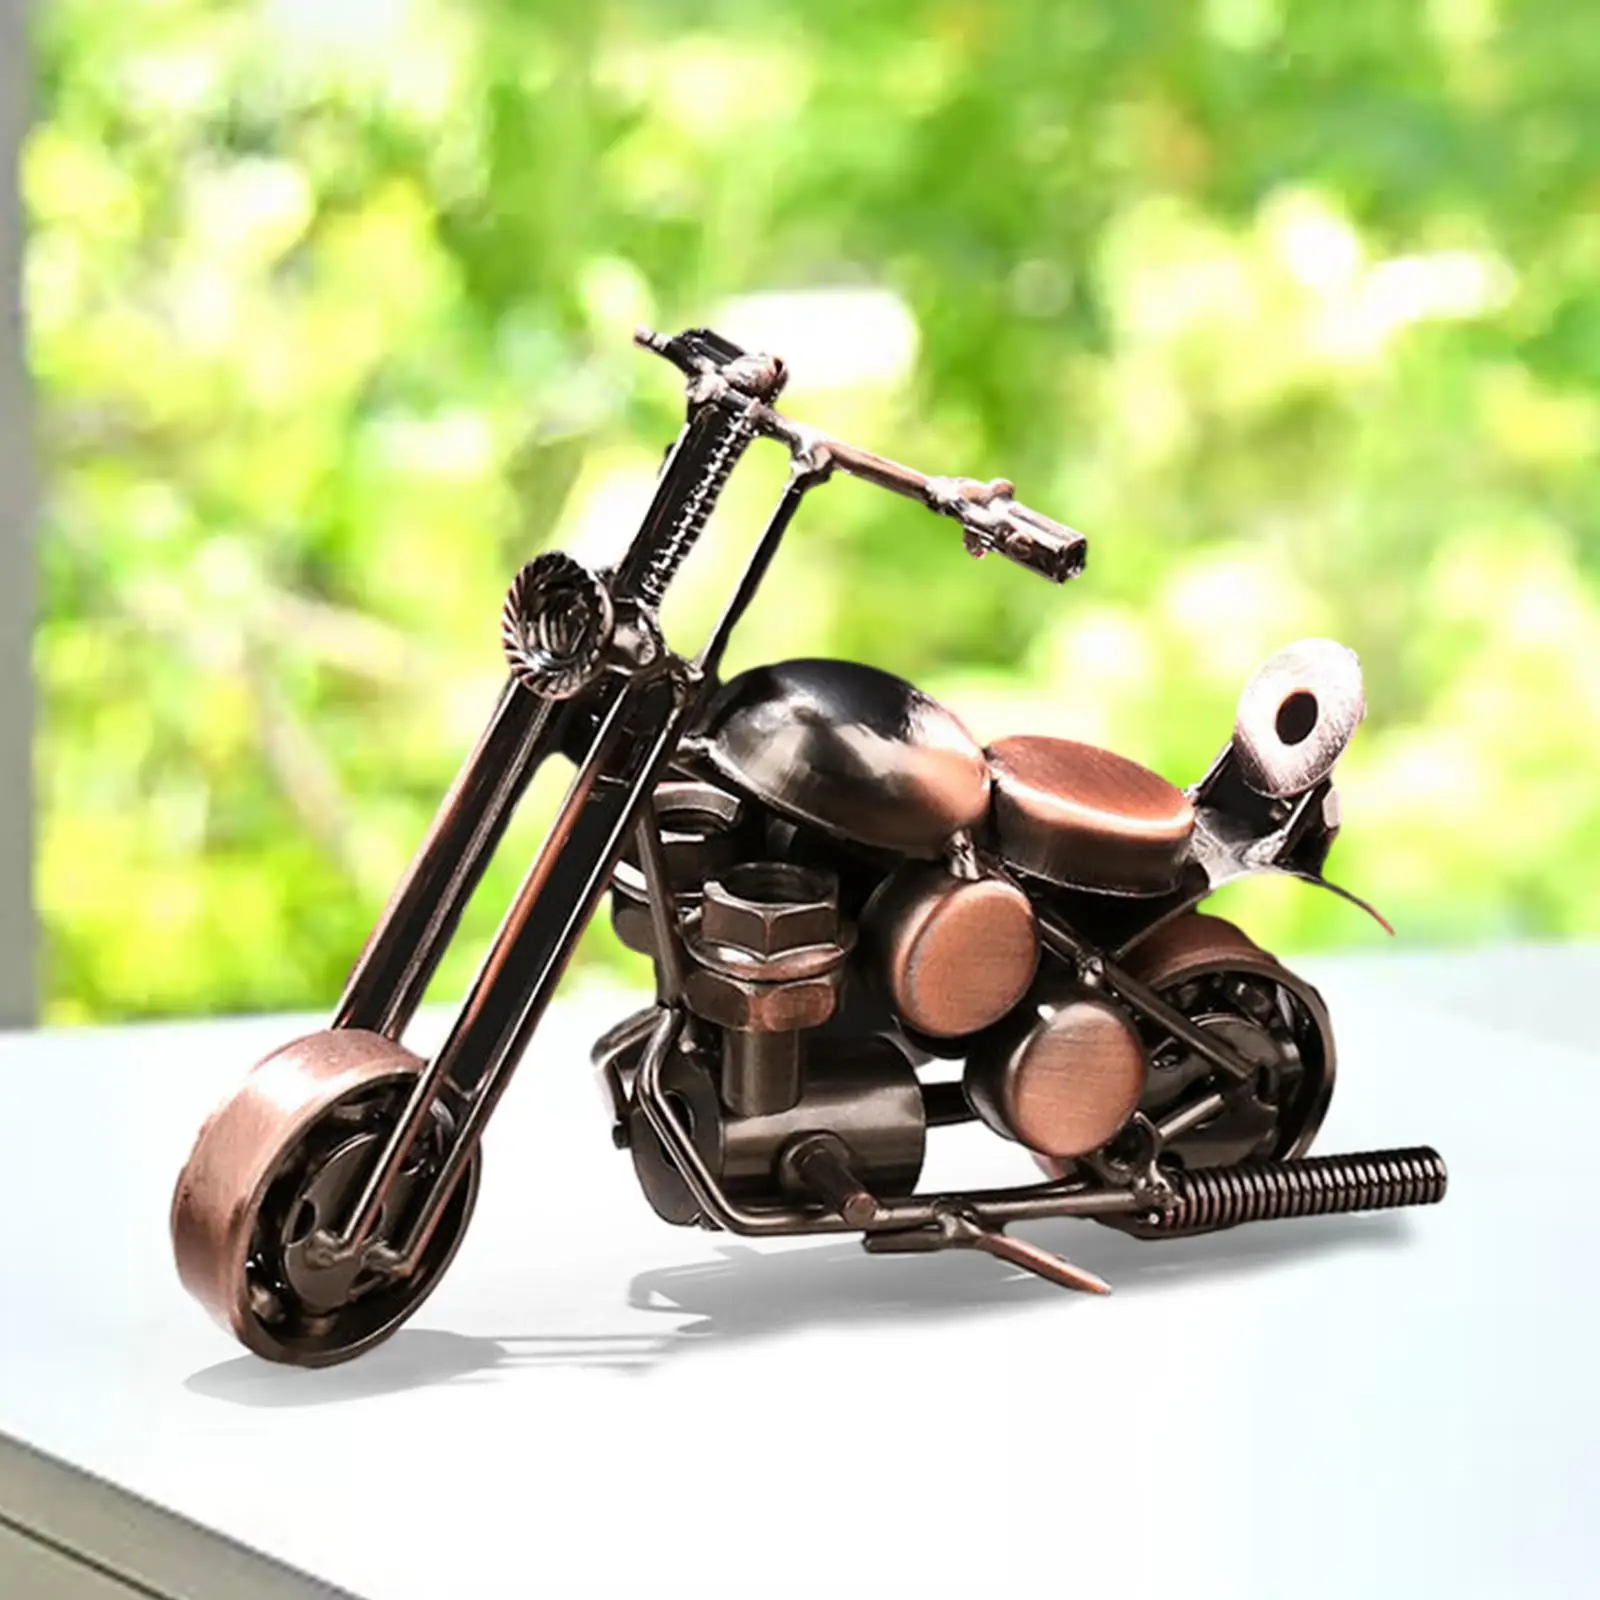 Motorcycle Model Motorcycle Sculpture Birthday Gift Figure Motorcycle Figurine Collectible for Office Bookshelf Desk Home Adults